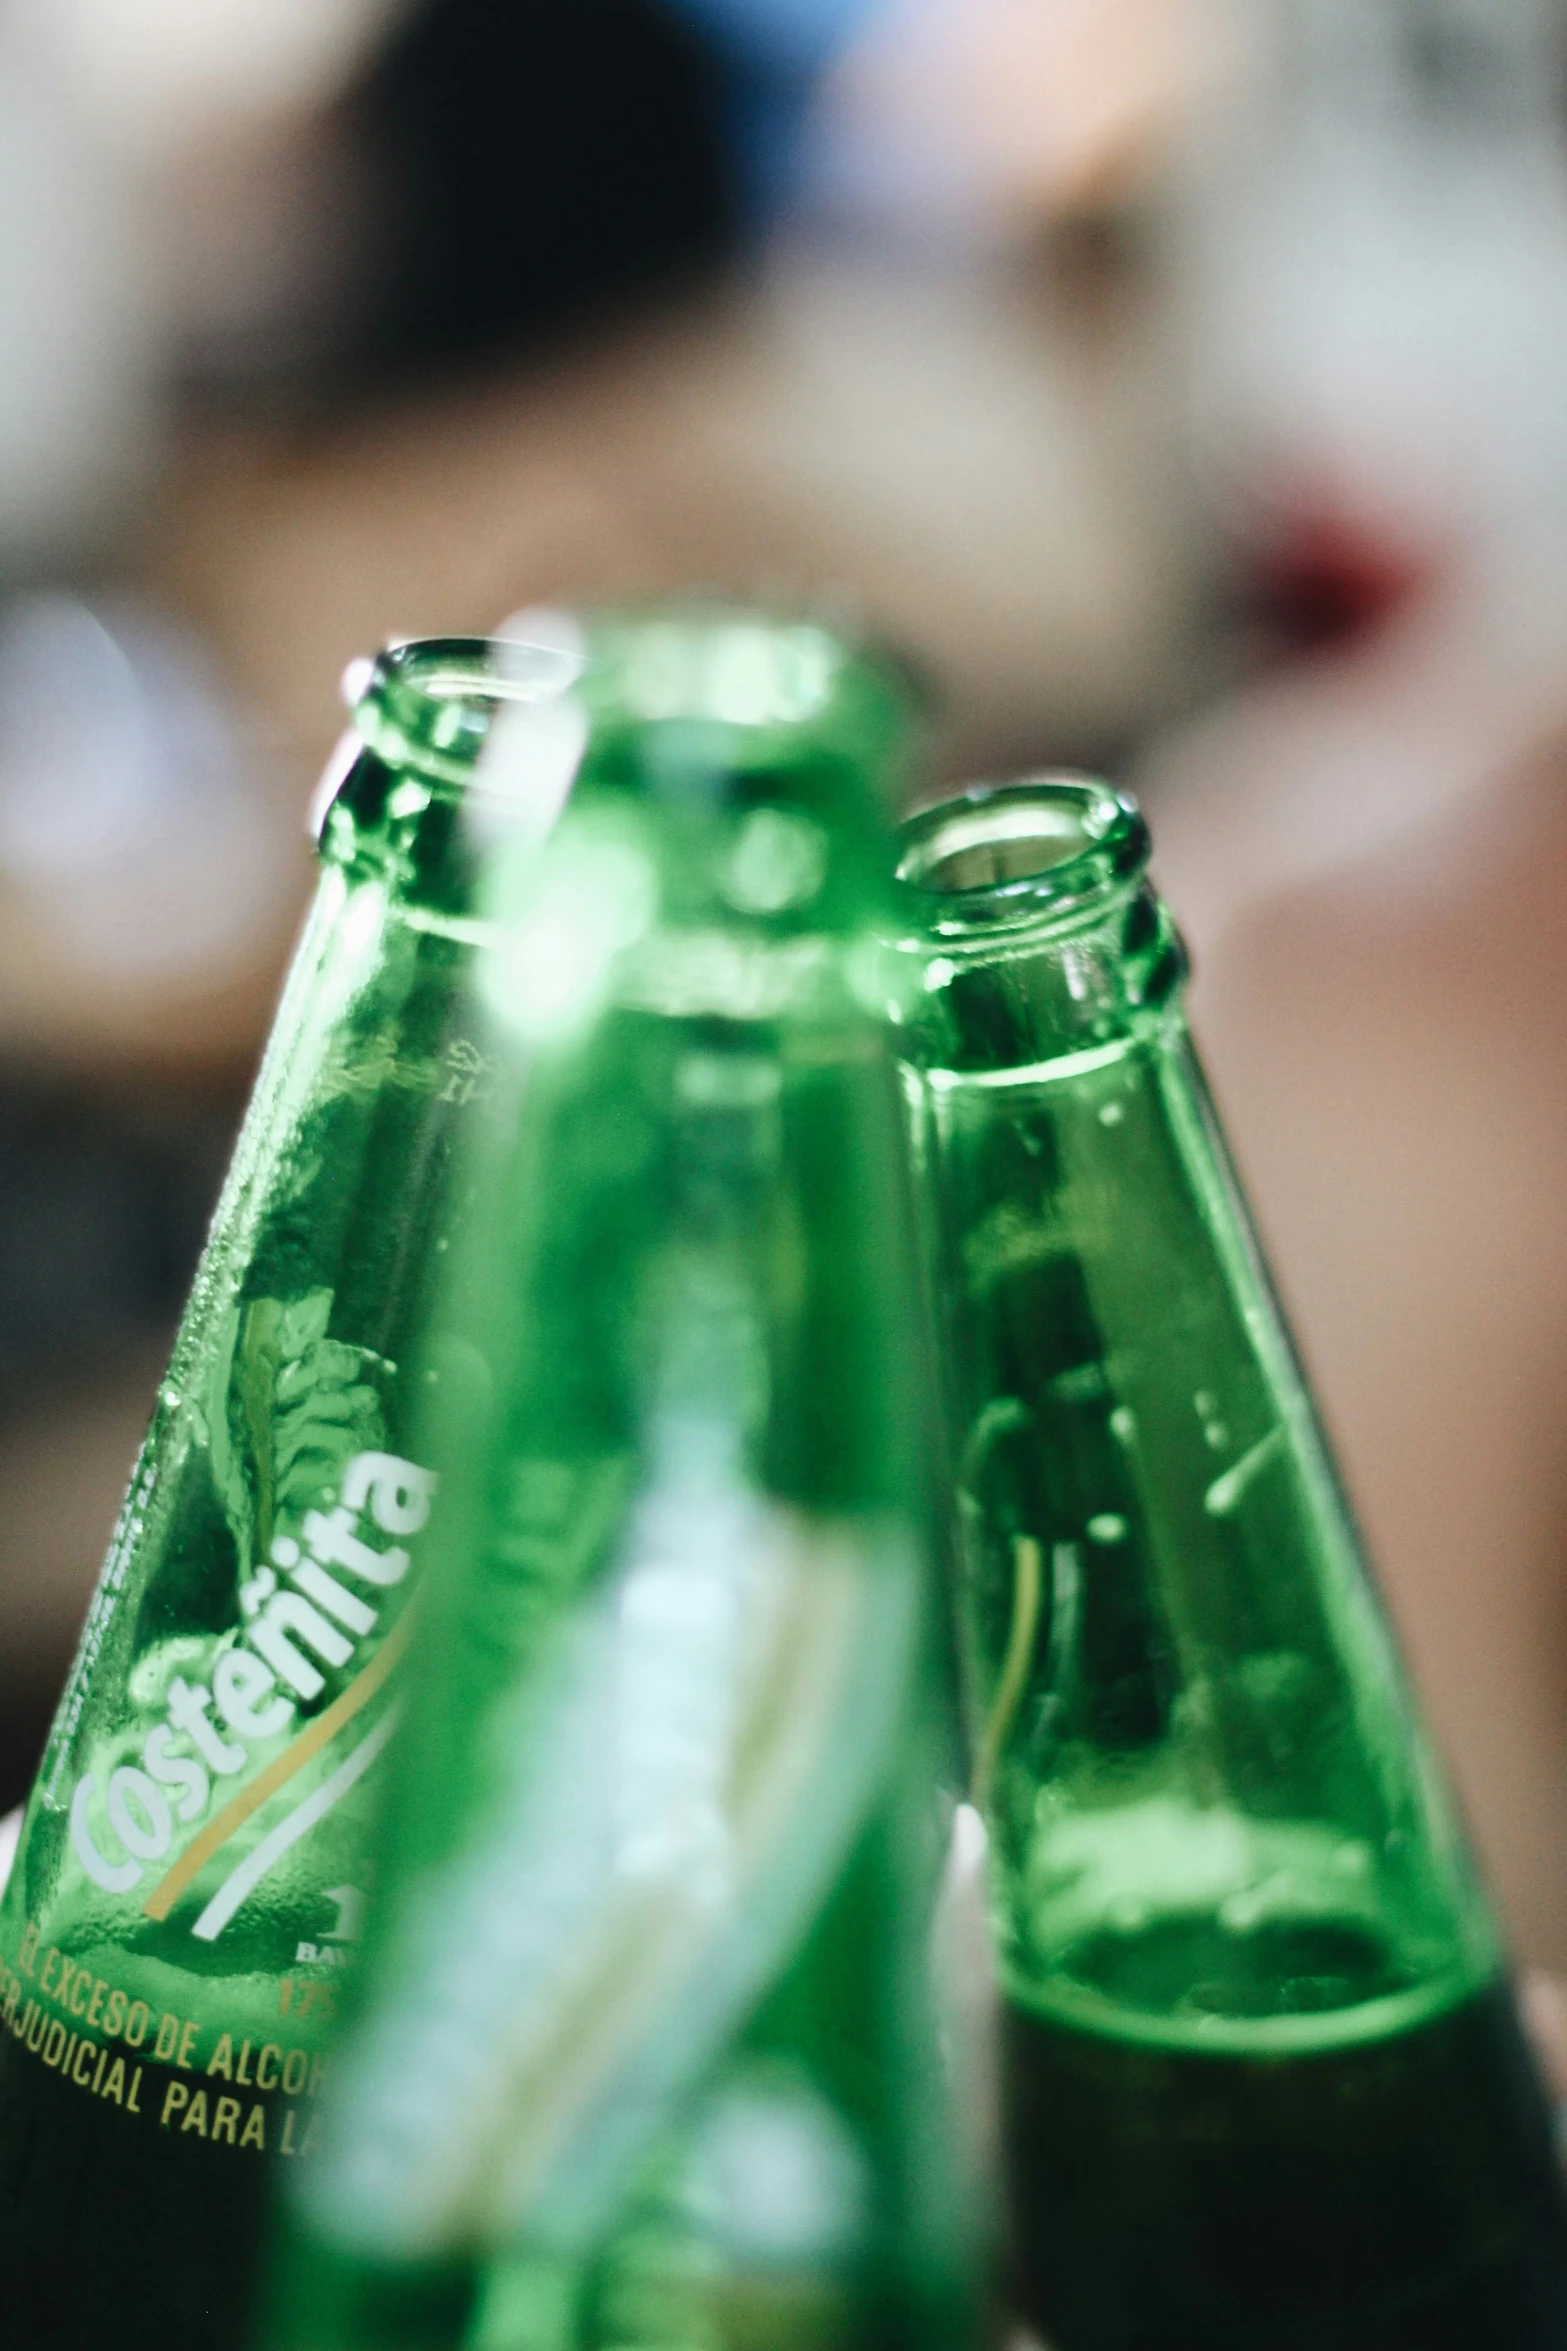 a hand holding three green beer bottles with the label seltings